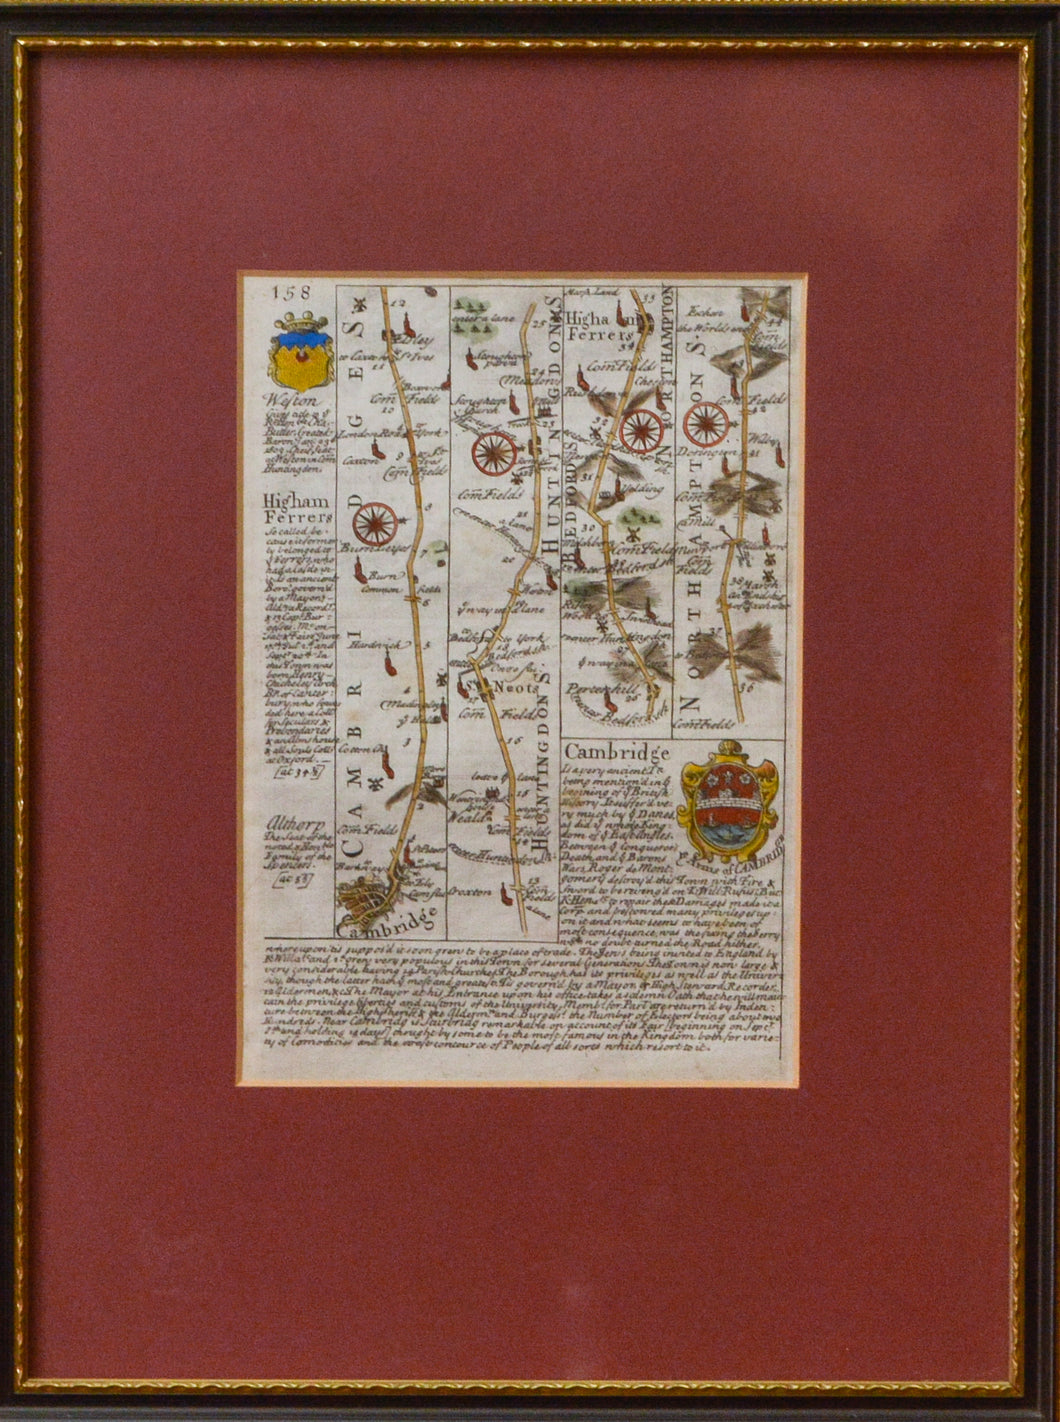 The Road from Cambridge into Northamptonshire - Antique Route Map circa 1720